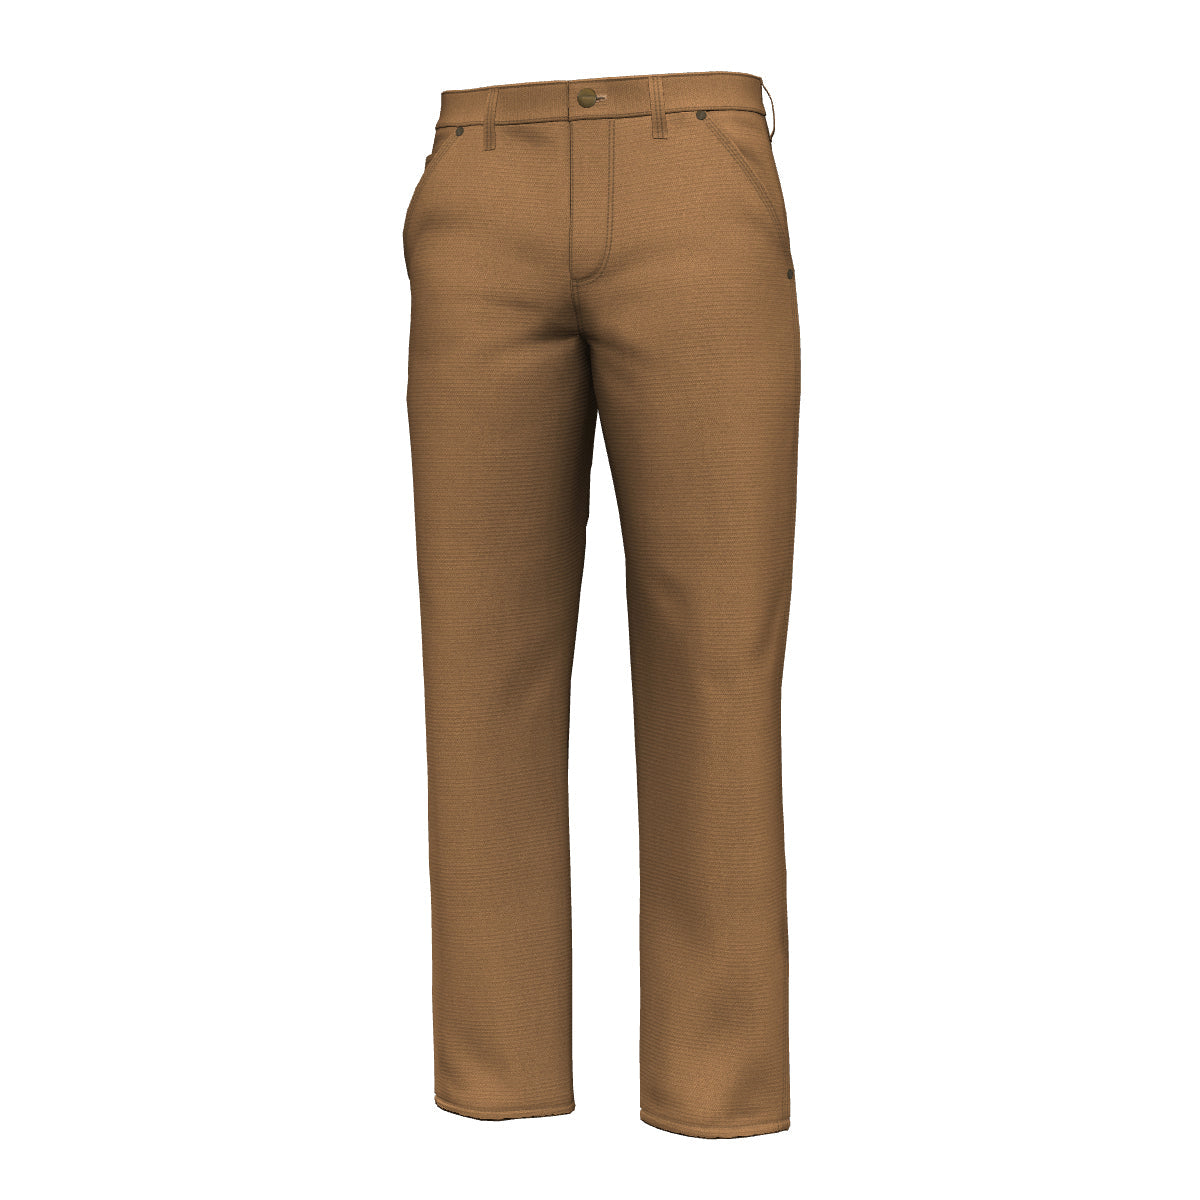 Custom Relaxed Fit Work Pant